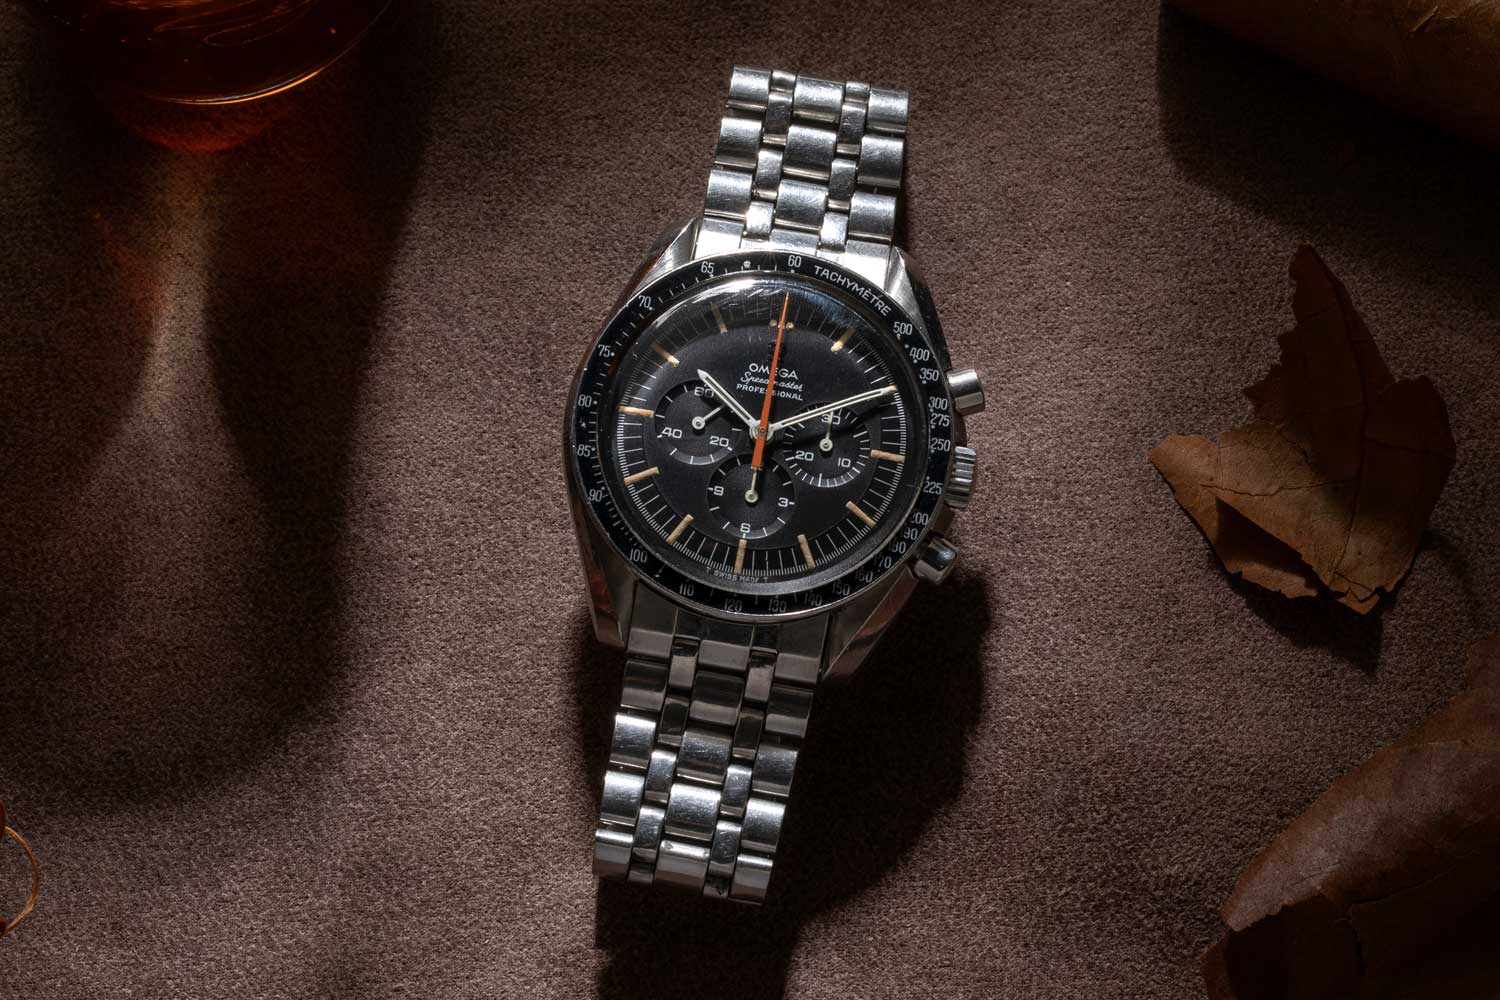 Revolution's Speedmaster Reference 145.012-67 Ultraman with a Holzer bracelet (Los Hombre Ultra), acquired from the Davidoff Brothers (©Revolution)